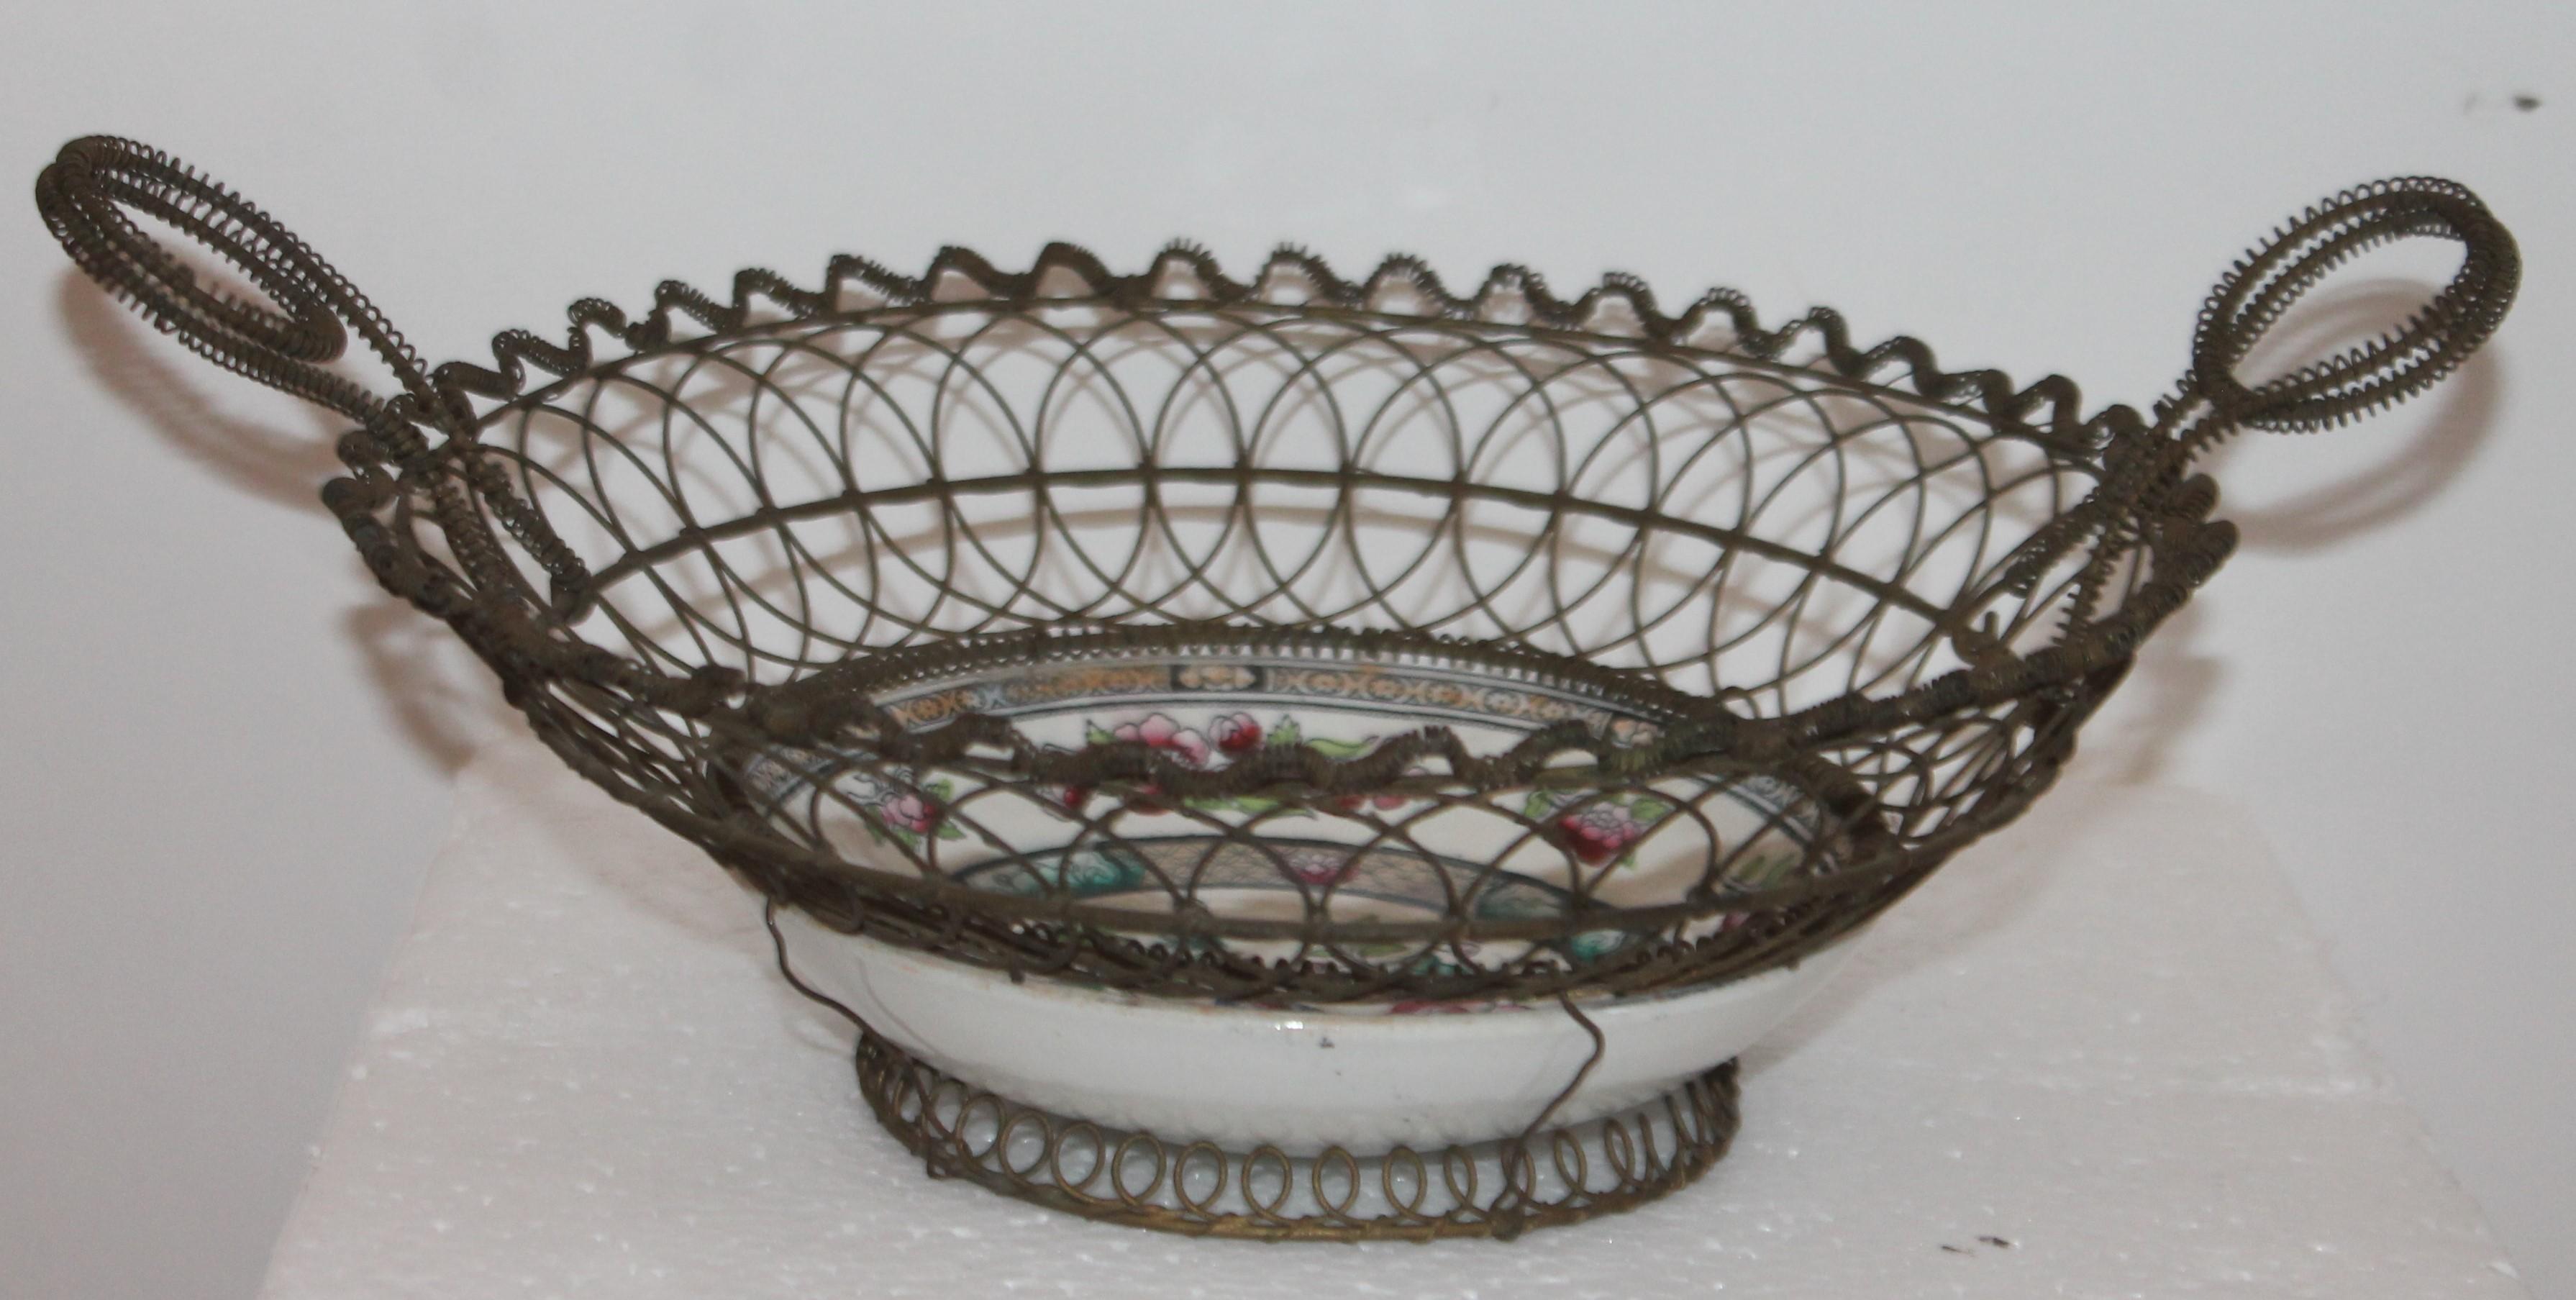 Folk Art 19th Century Handmade Wire Basket from 1870 with a Bowl Inset